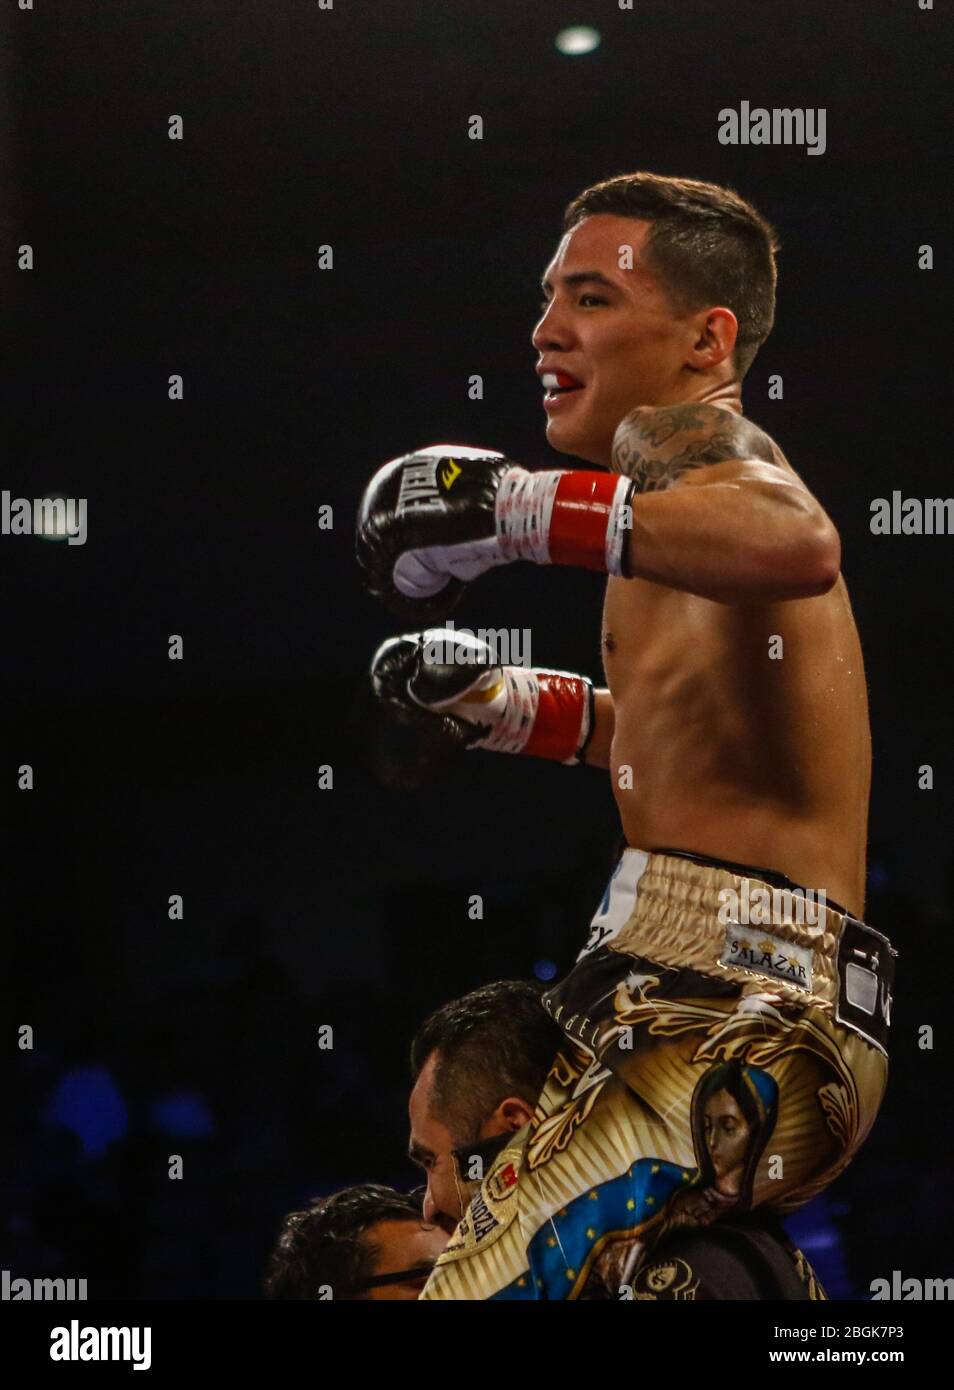 The Mexican boxer originally from Sonora Nogales, Oscar Valdez (gold) won by knockout night of Saturday to Ernie Sanchez city of Zamboanga del Sur (red) during boxing match featherweight held at the Tucson Convention Center Arizona. Photo: Luis Gutierrez Stock Photo